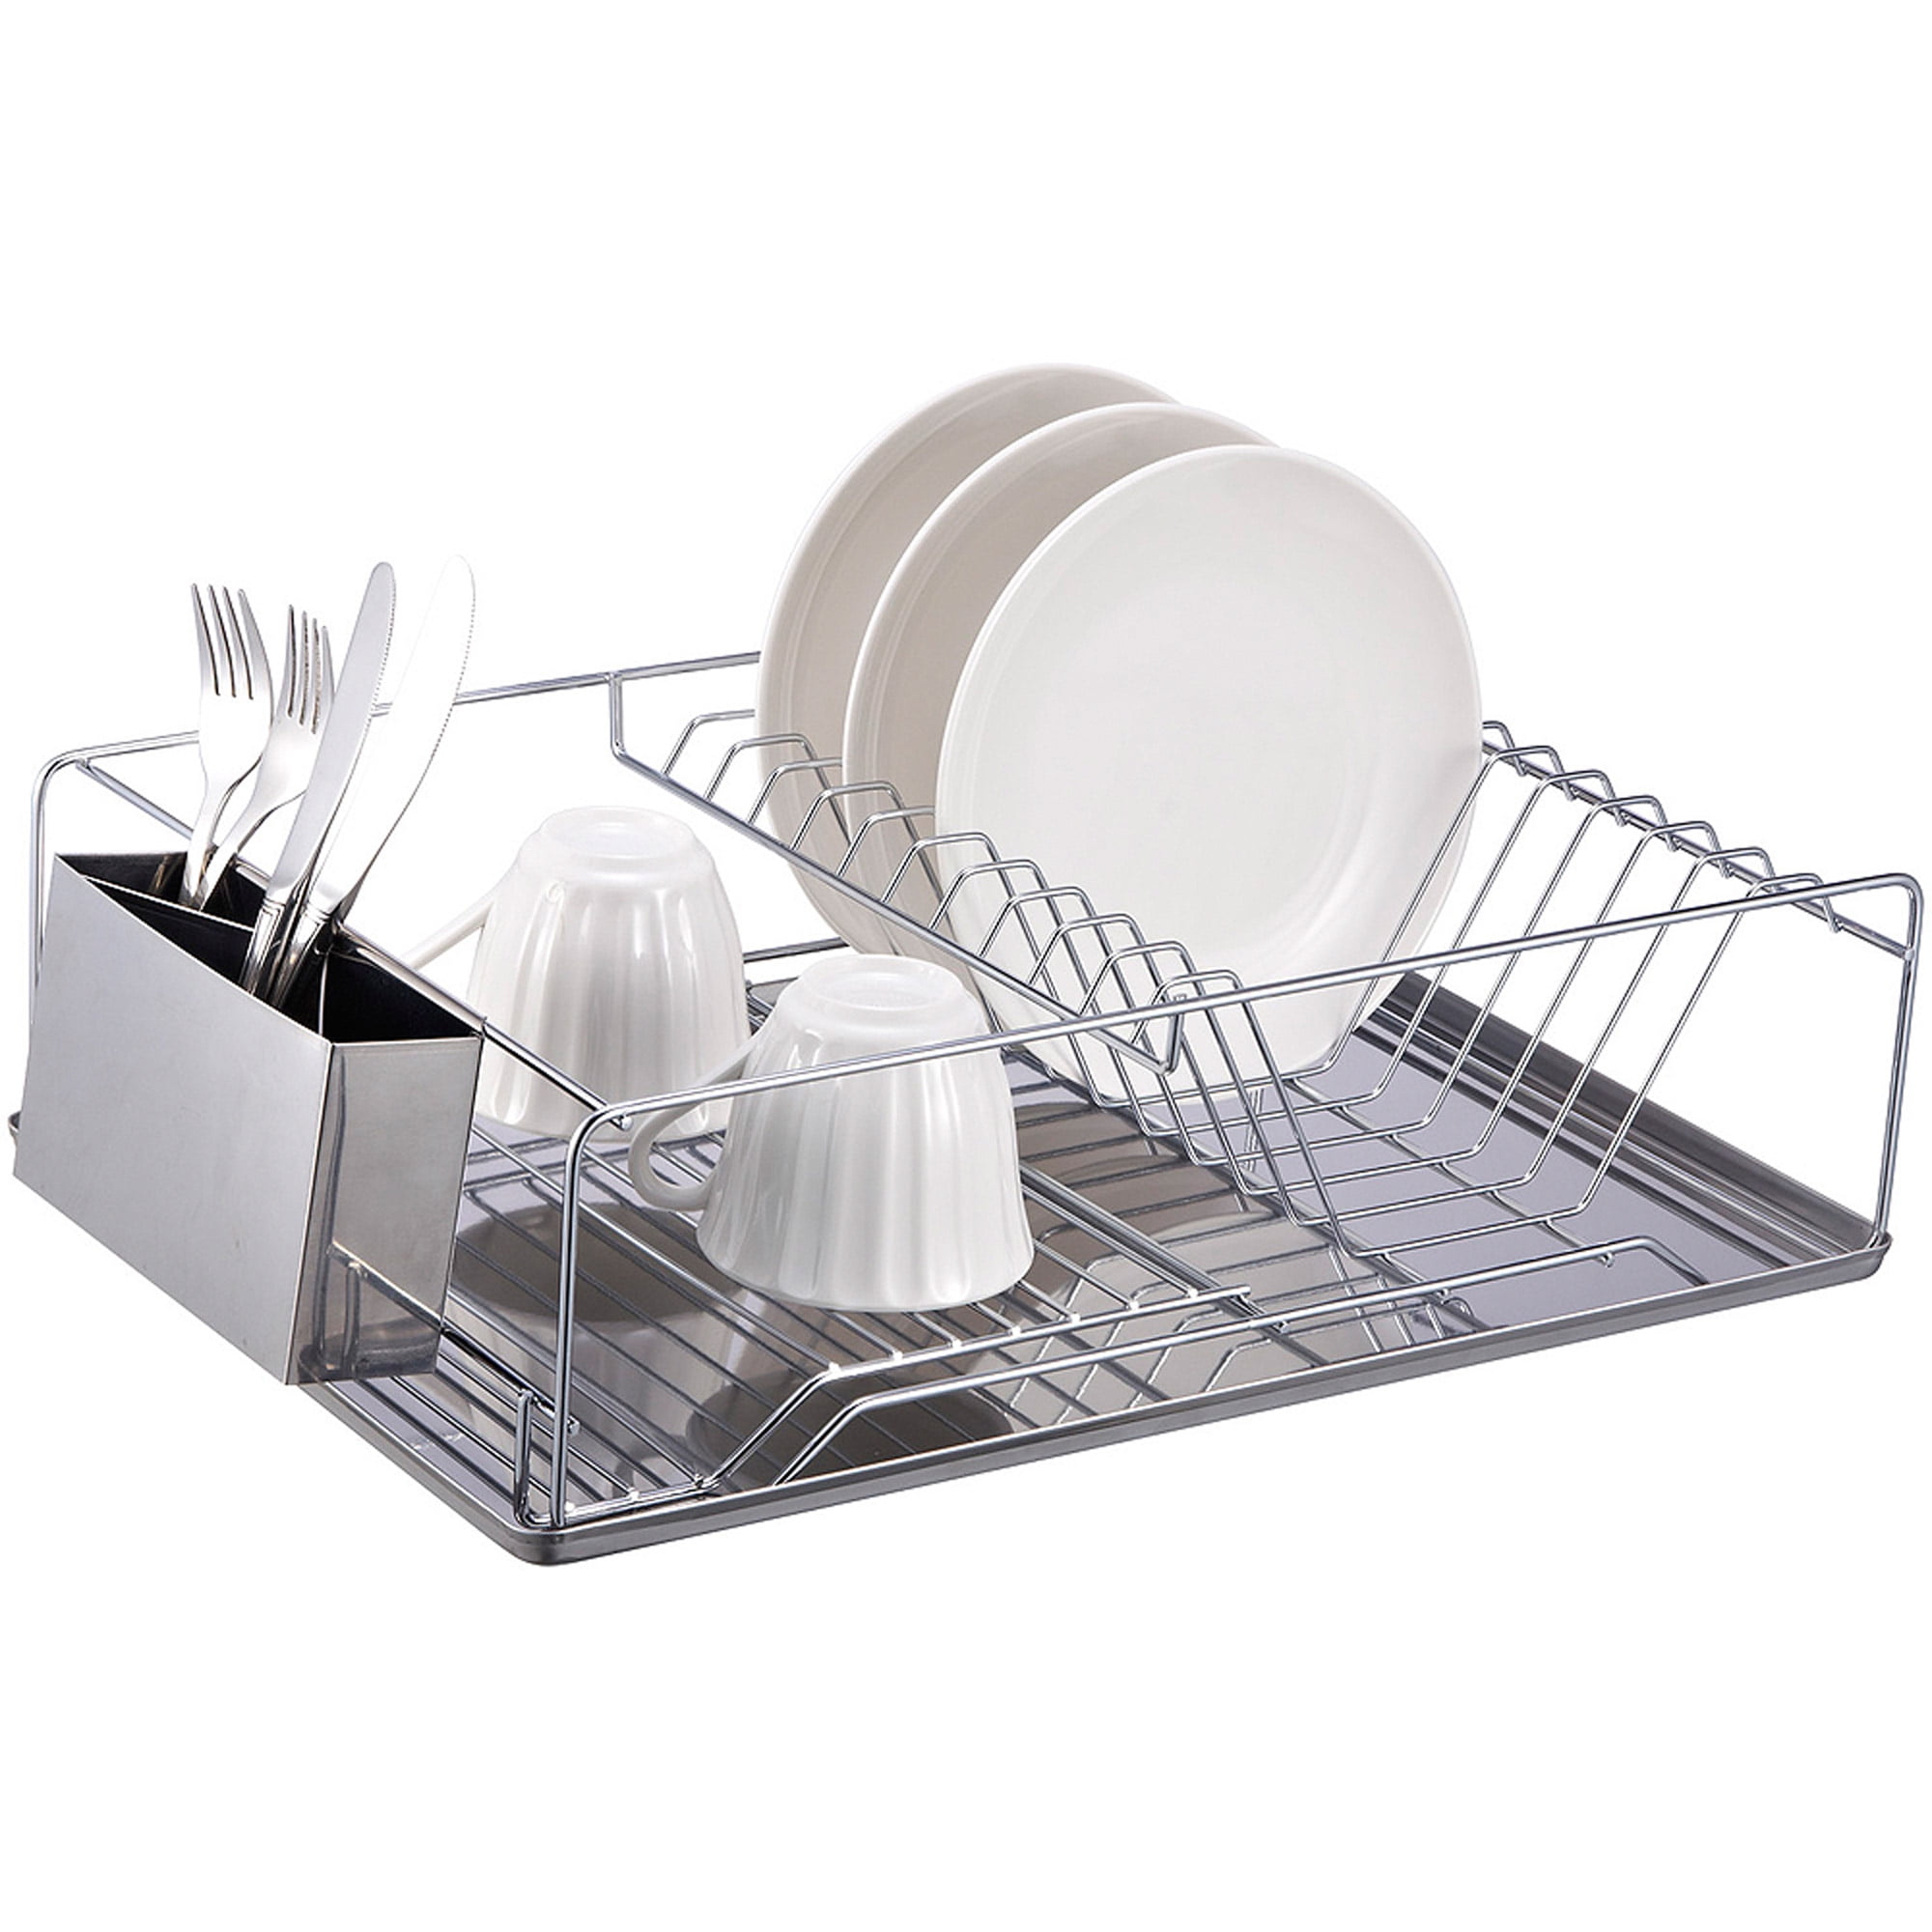 home basics chrome plated steel dish rack with stainless steel tray walmart com